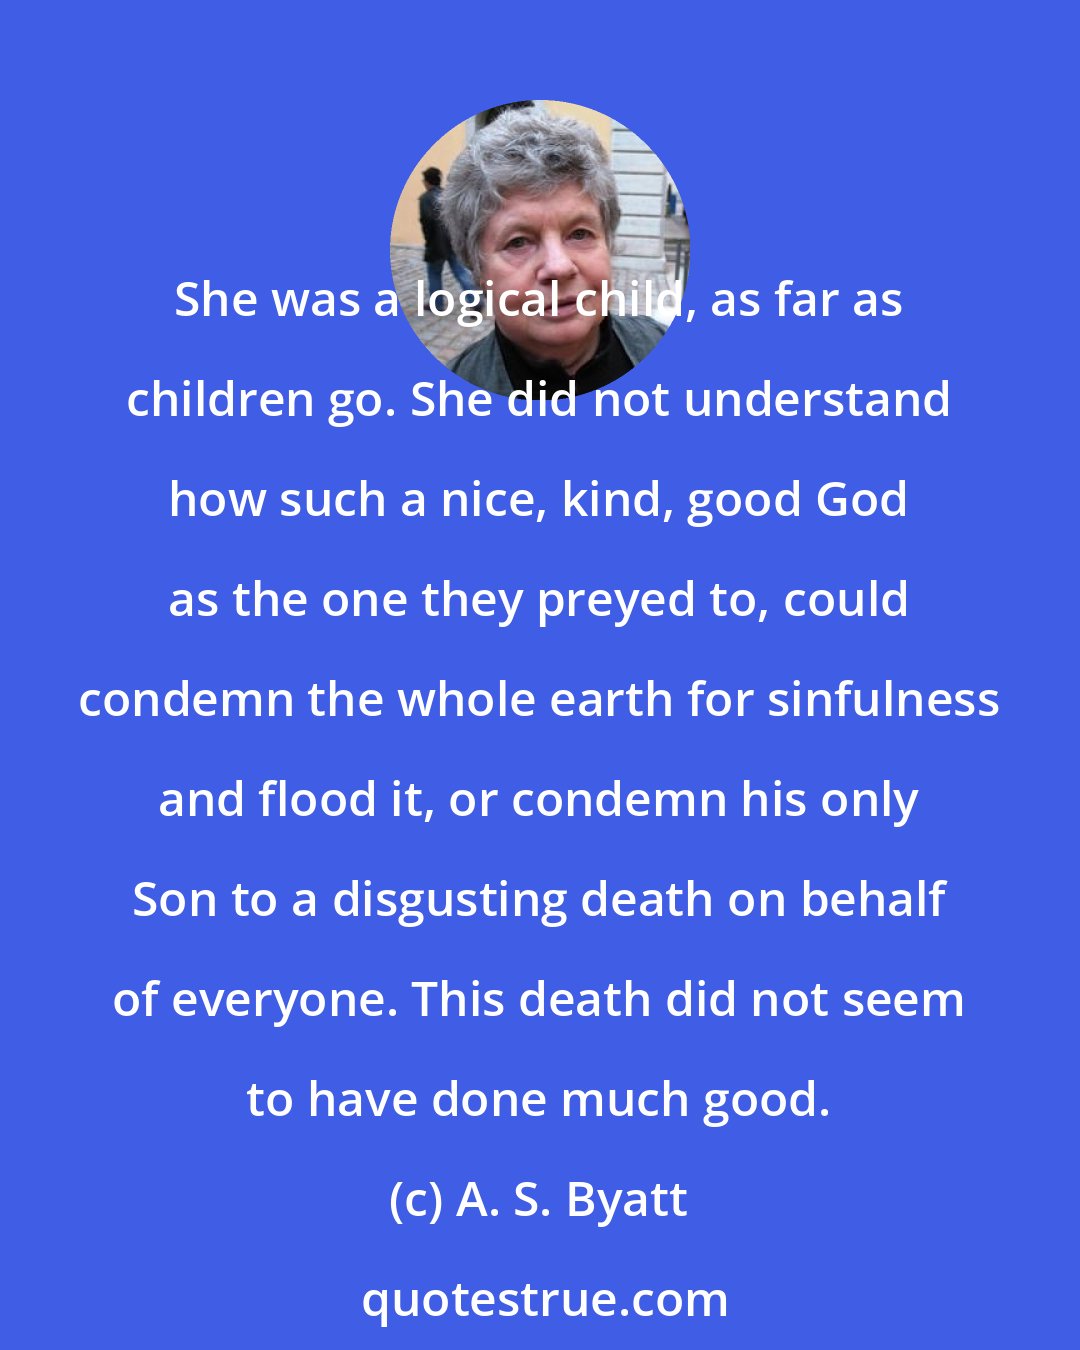 A. S. Byatt: She was a logical child, as far as children go. She did not understand how such a nice, kind, good God as the one they preyed to, could condemn the whole earth for sinfulness and flood it, or condemn his only Son to a disgusting death on behalf of everyone. This death did not seem to have done much good.